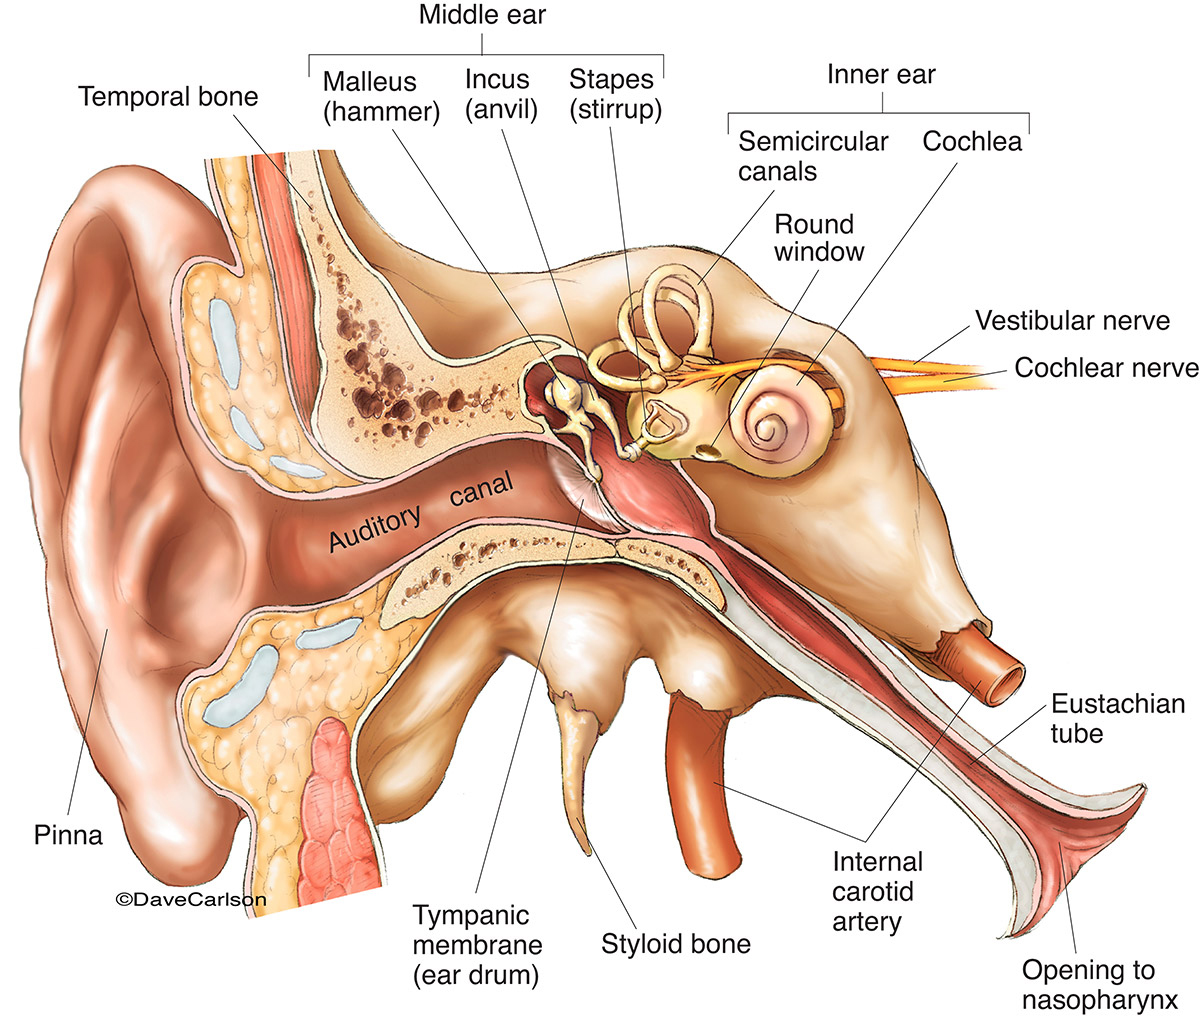 Illustration of the anatomy and related structures of the human ear.